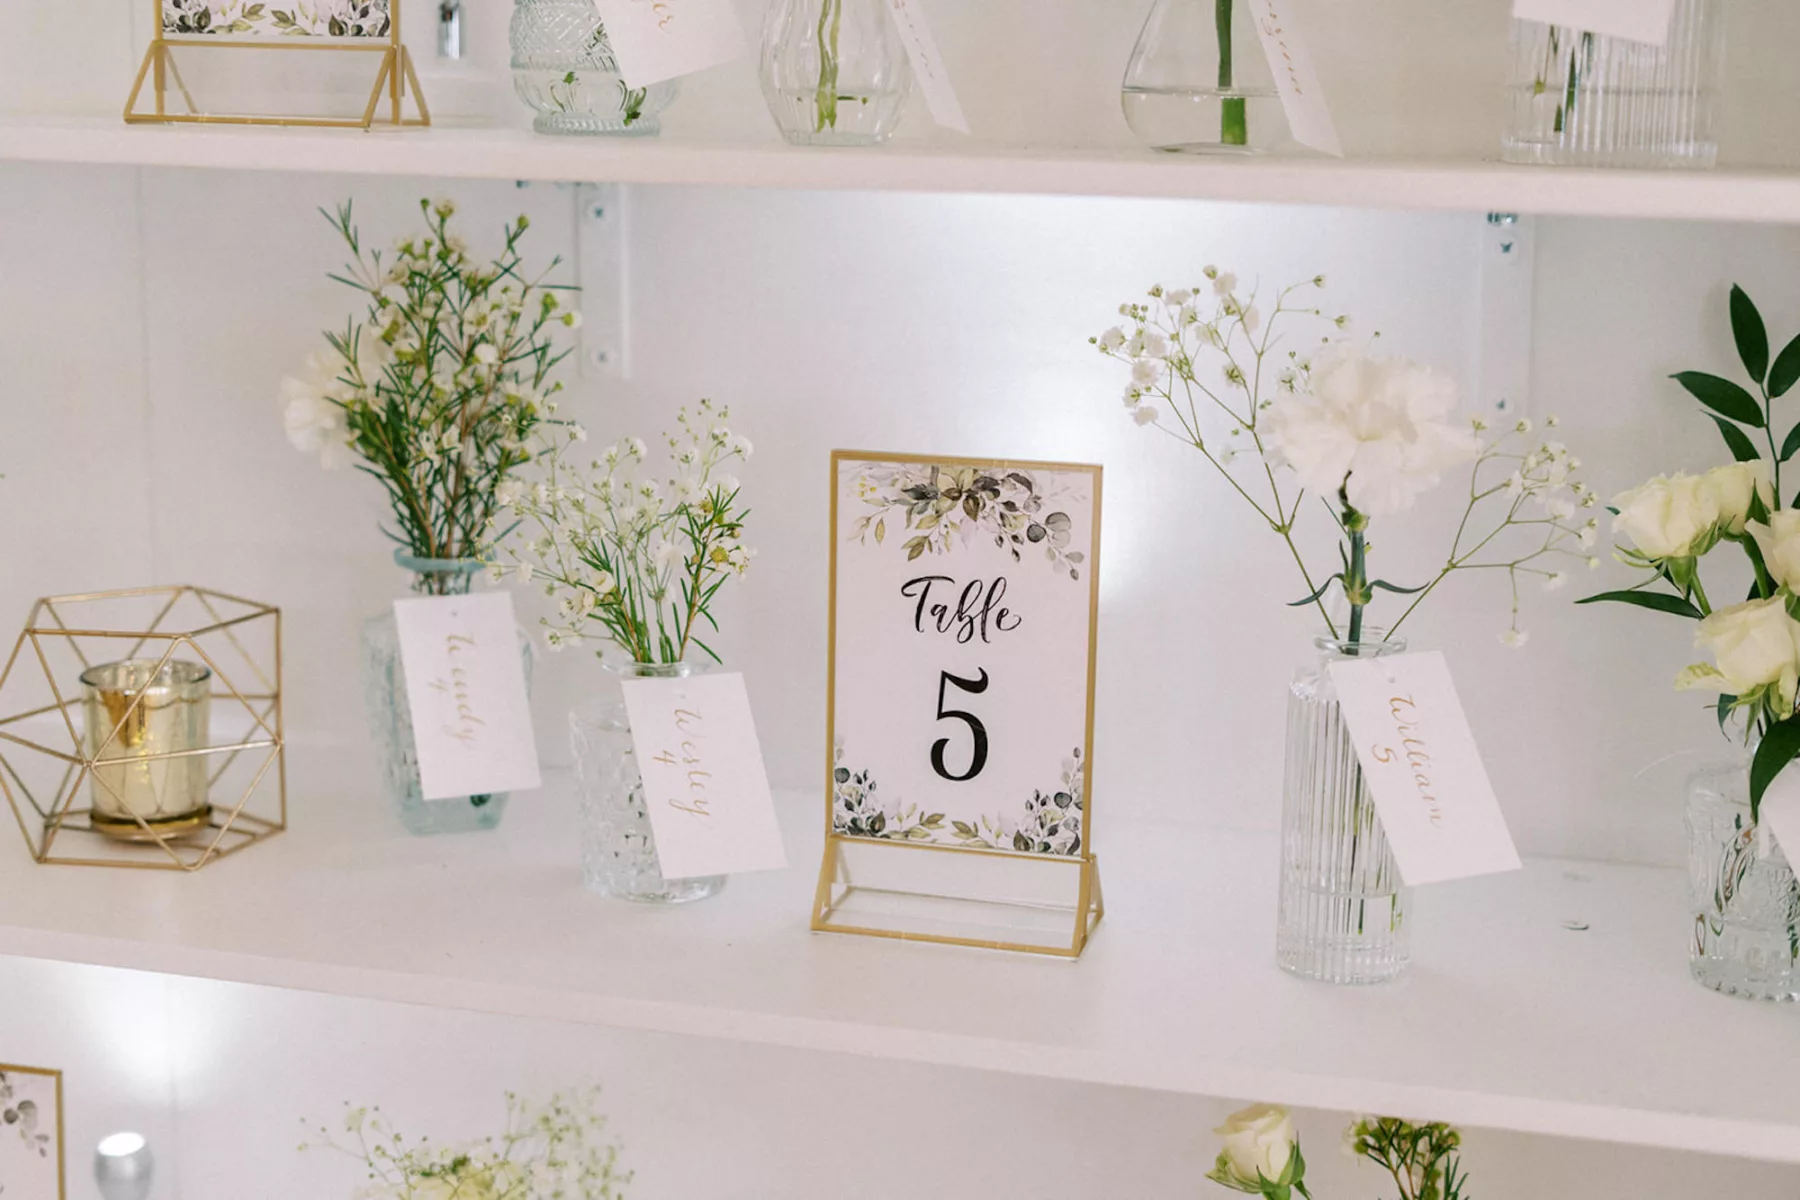 Modern White and Gold Wedding Reception Seating Chart Shelves with Bud Vase Place Cards Inspiration